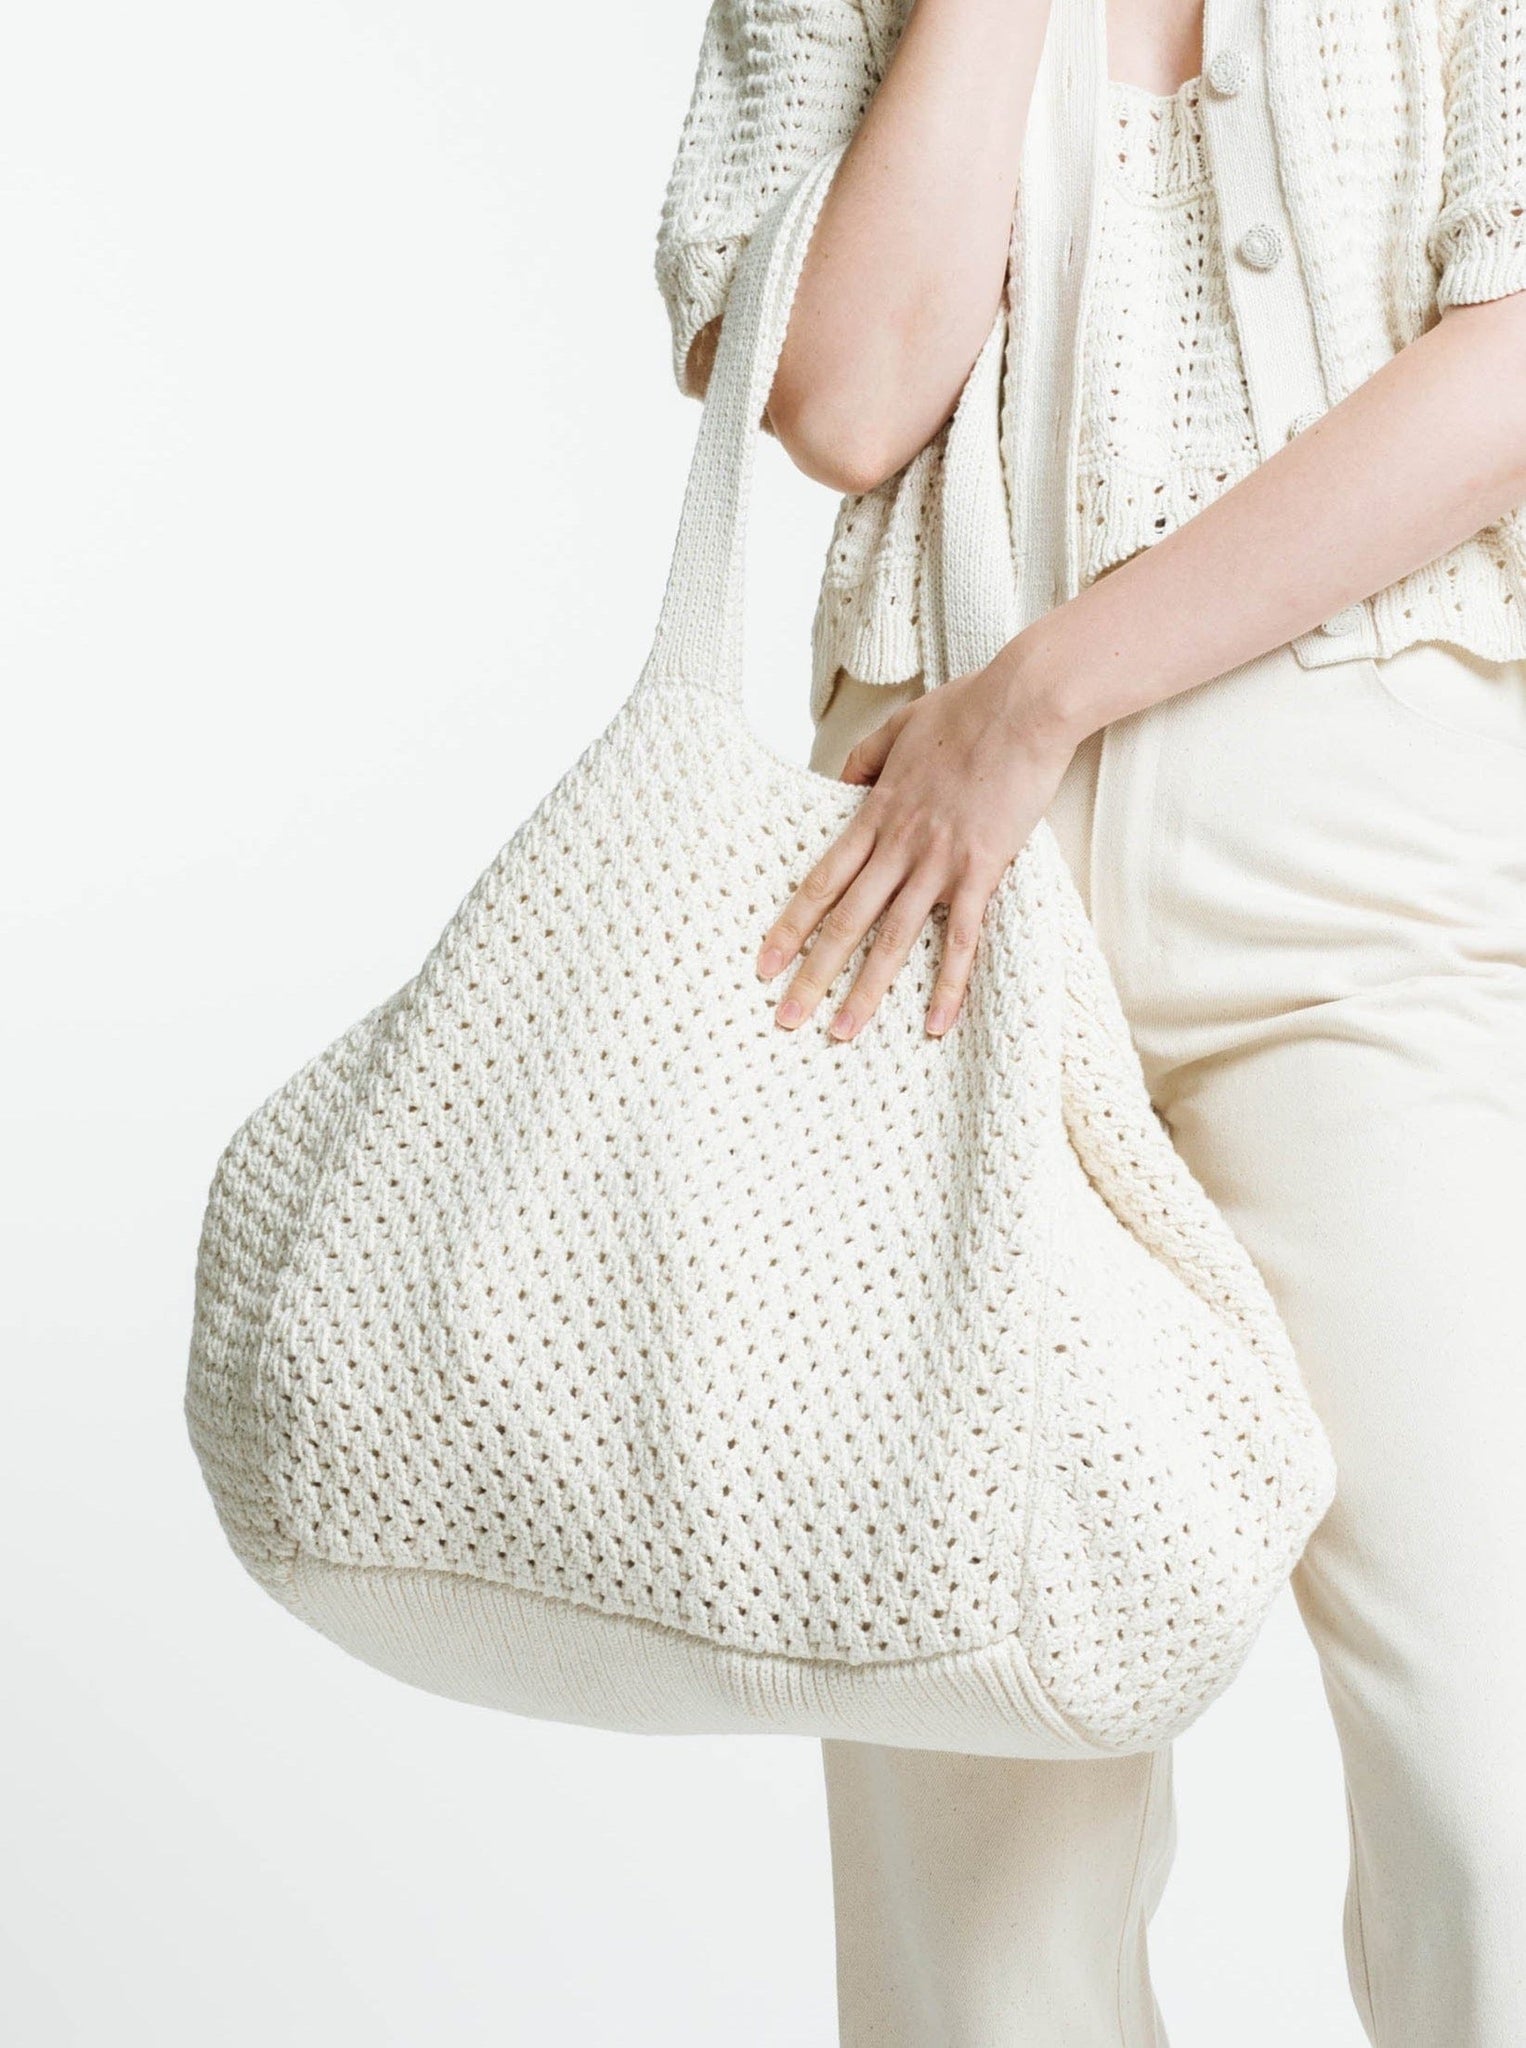 A person carrying a large white Crochet Slouchy Tote - Ivory bag, handmade in Peru.